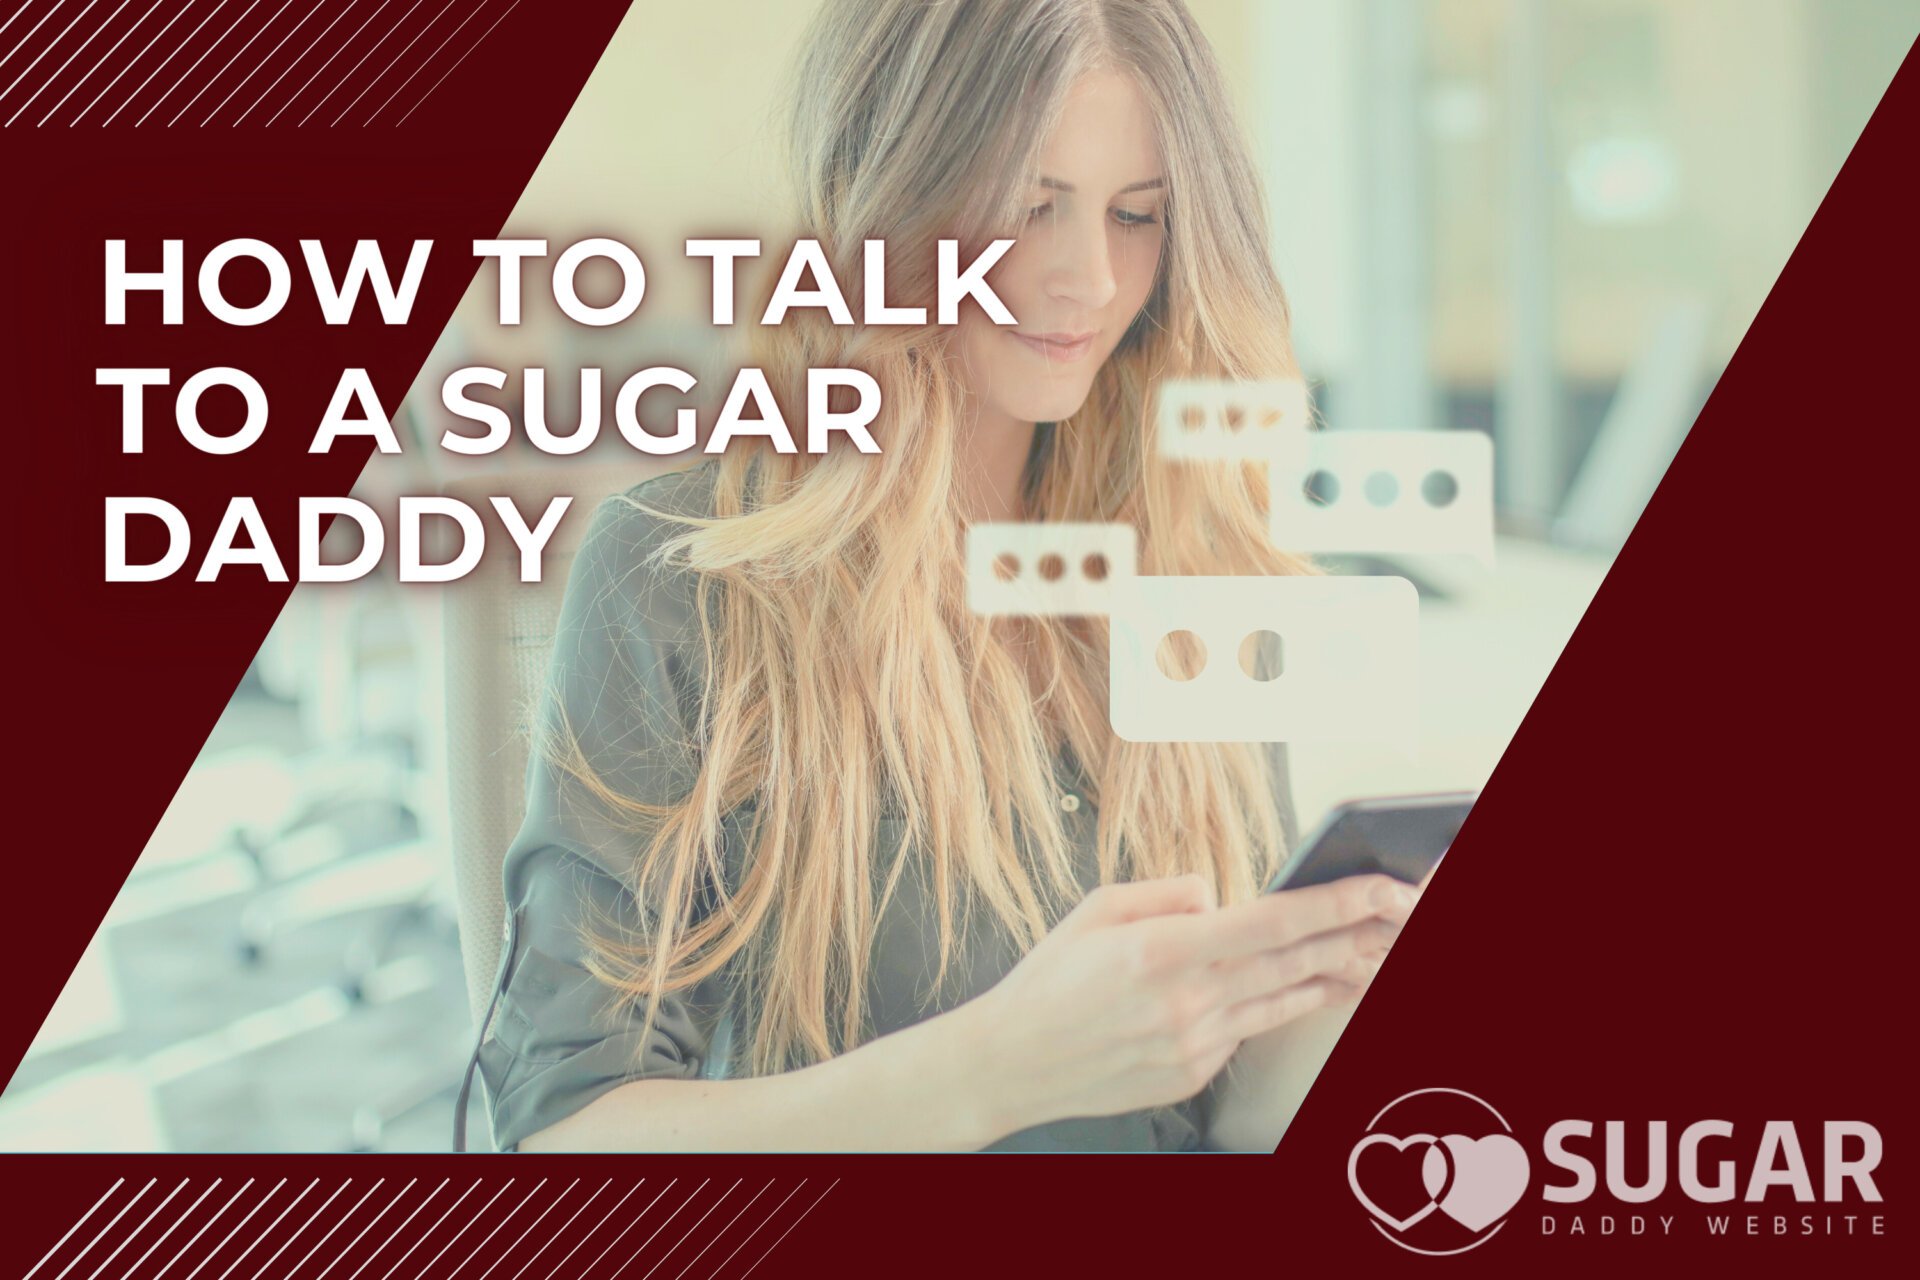 How to Talk to a Sugar Daddy: Greeting & First Сonversation